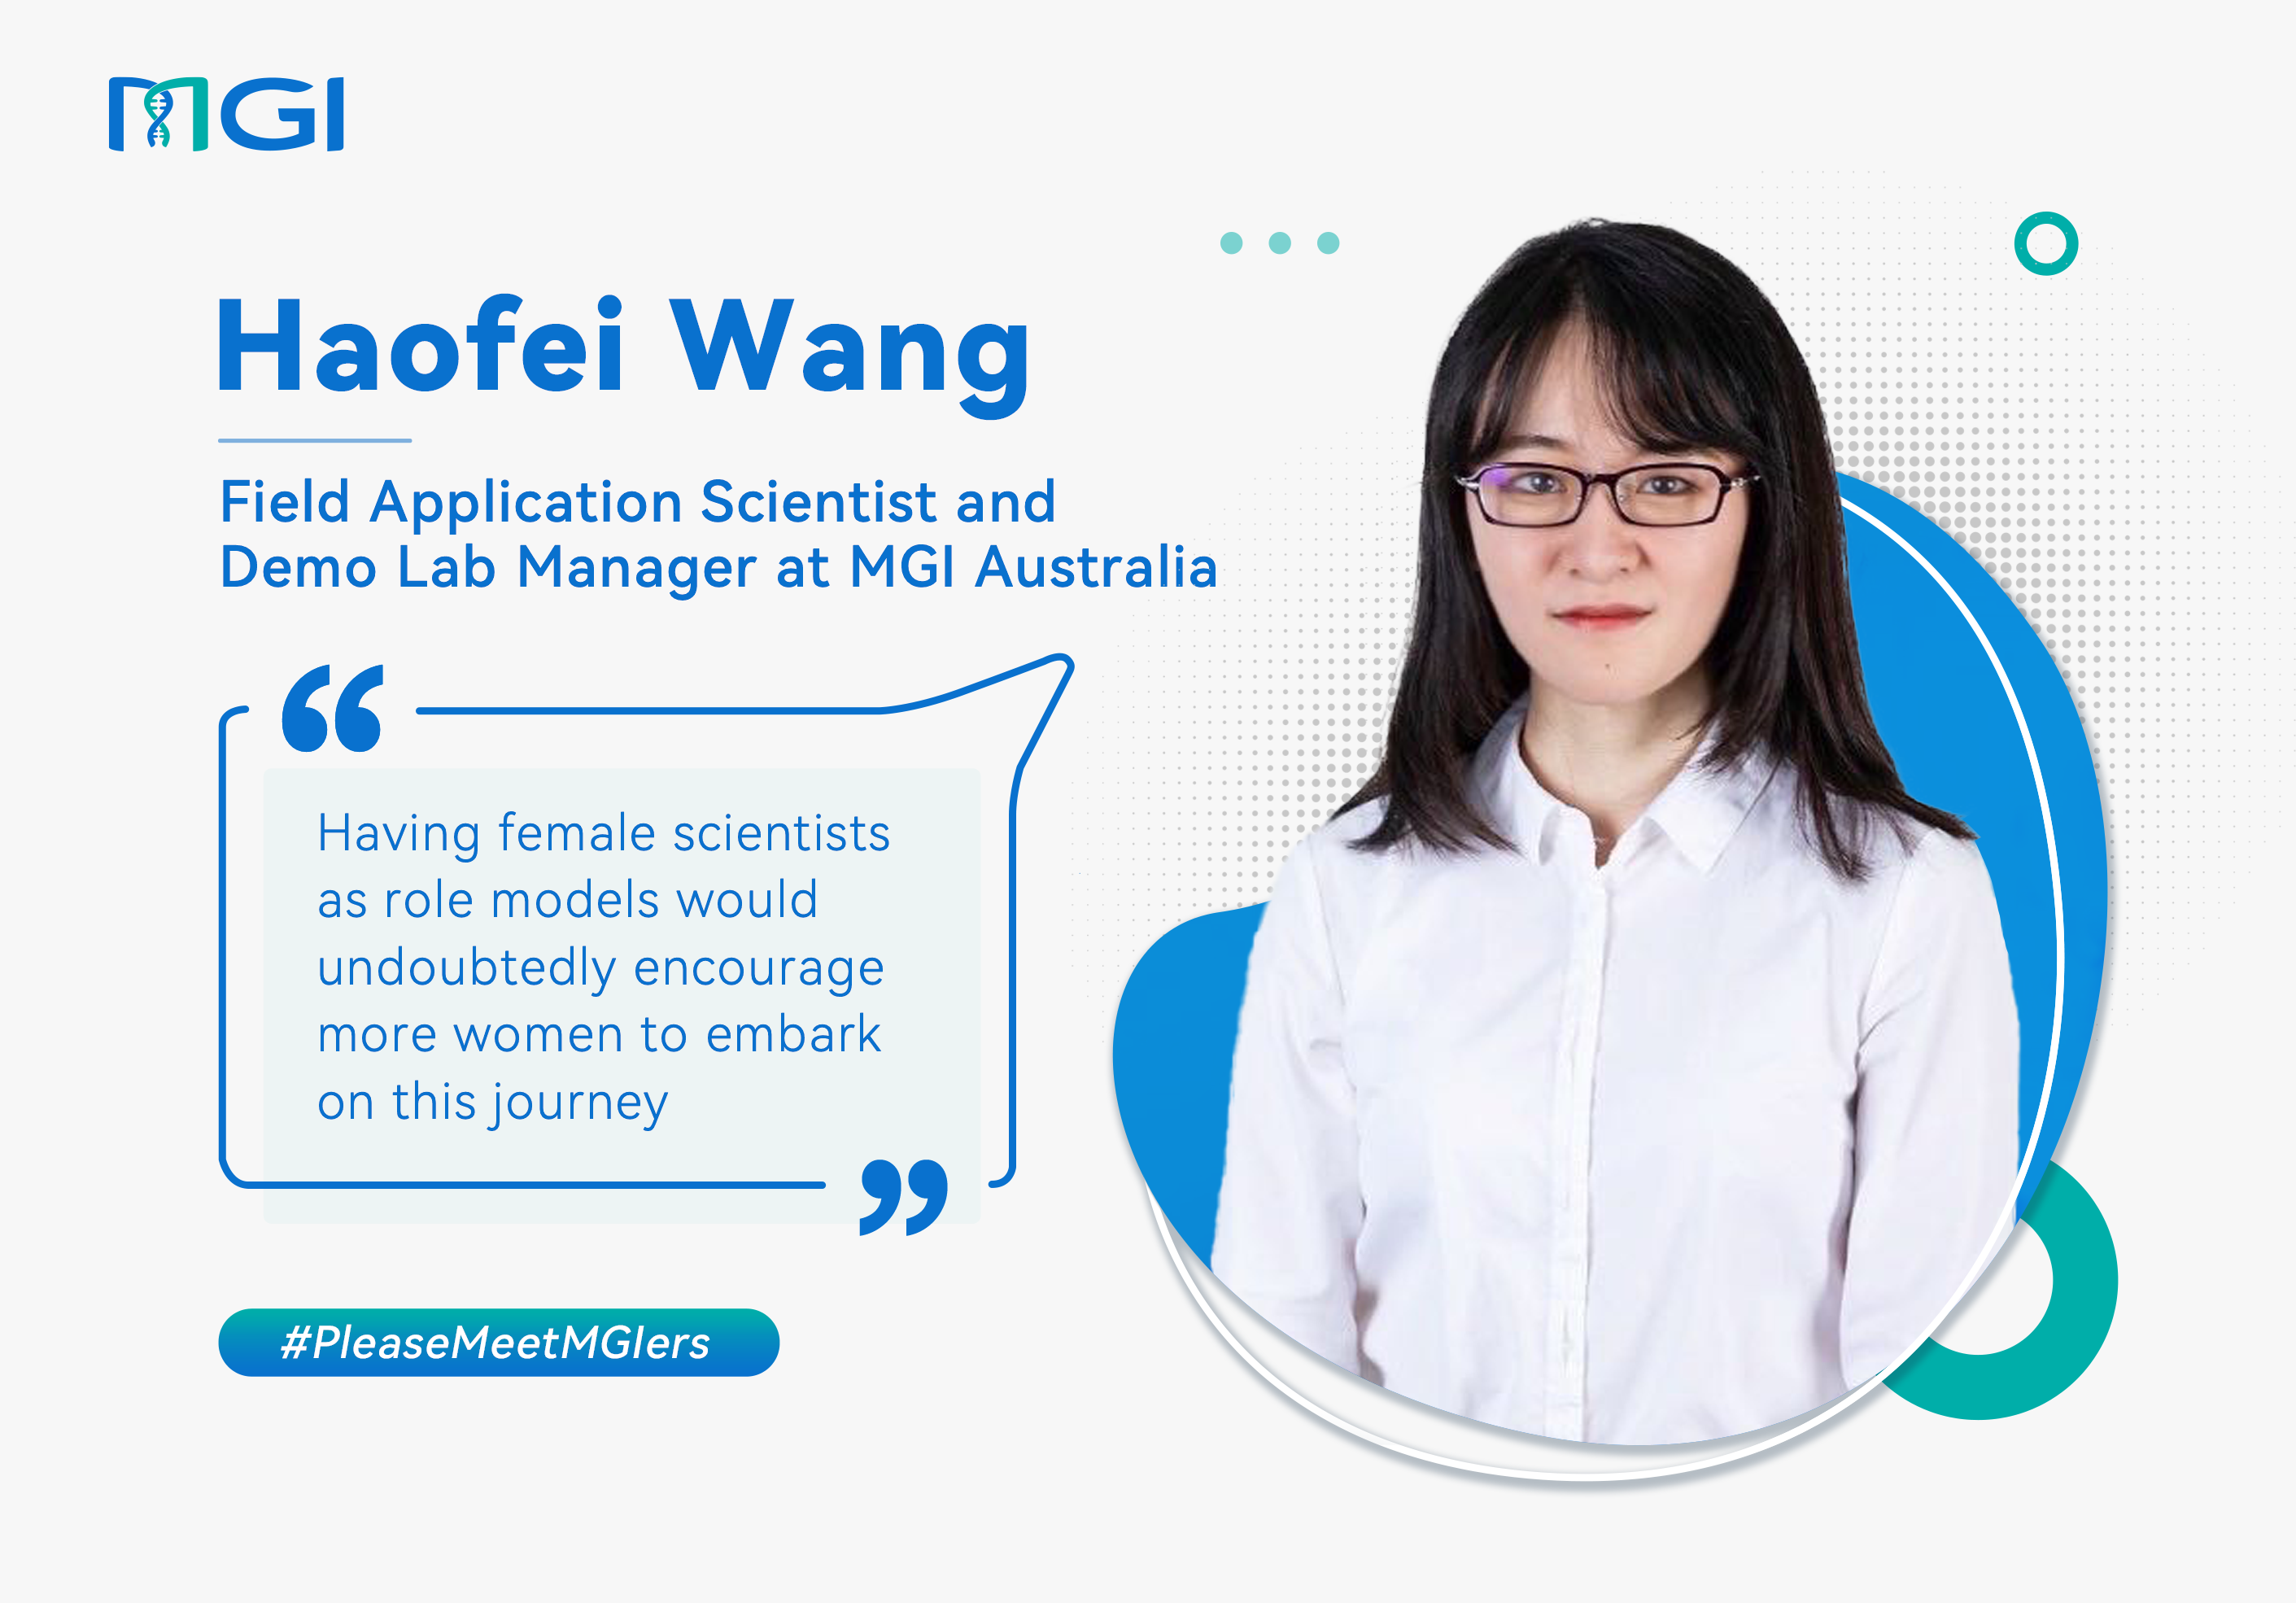 Interview with Haofei Wang: Having Female Scientists as Role Models Would Undoubtedly Encourage More Women to Embark on This Journey